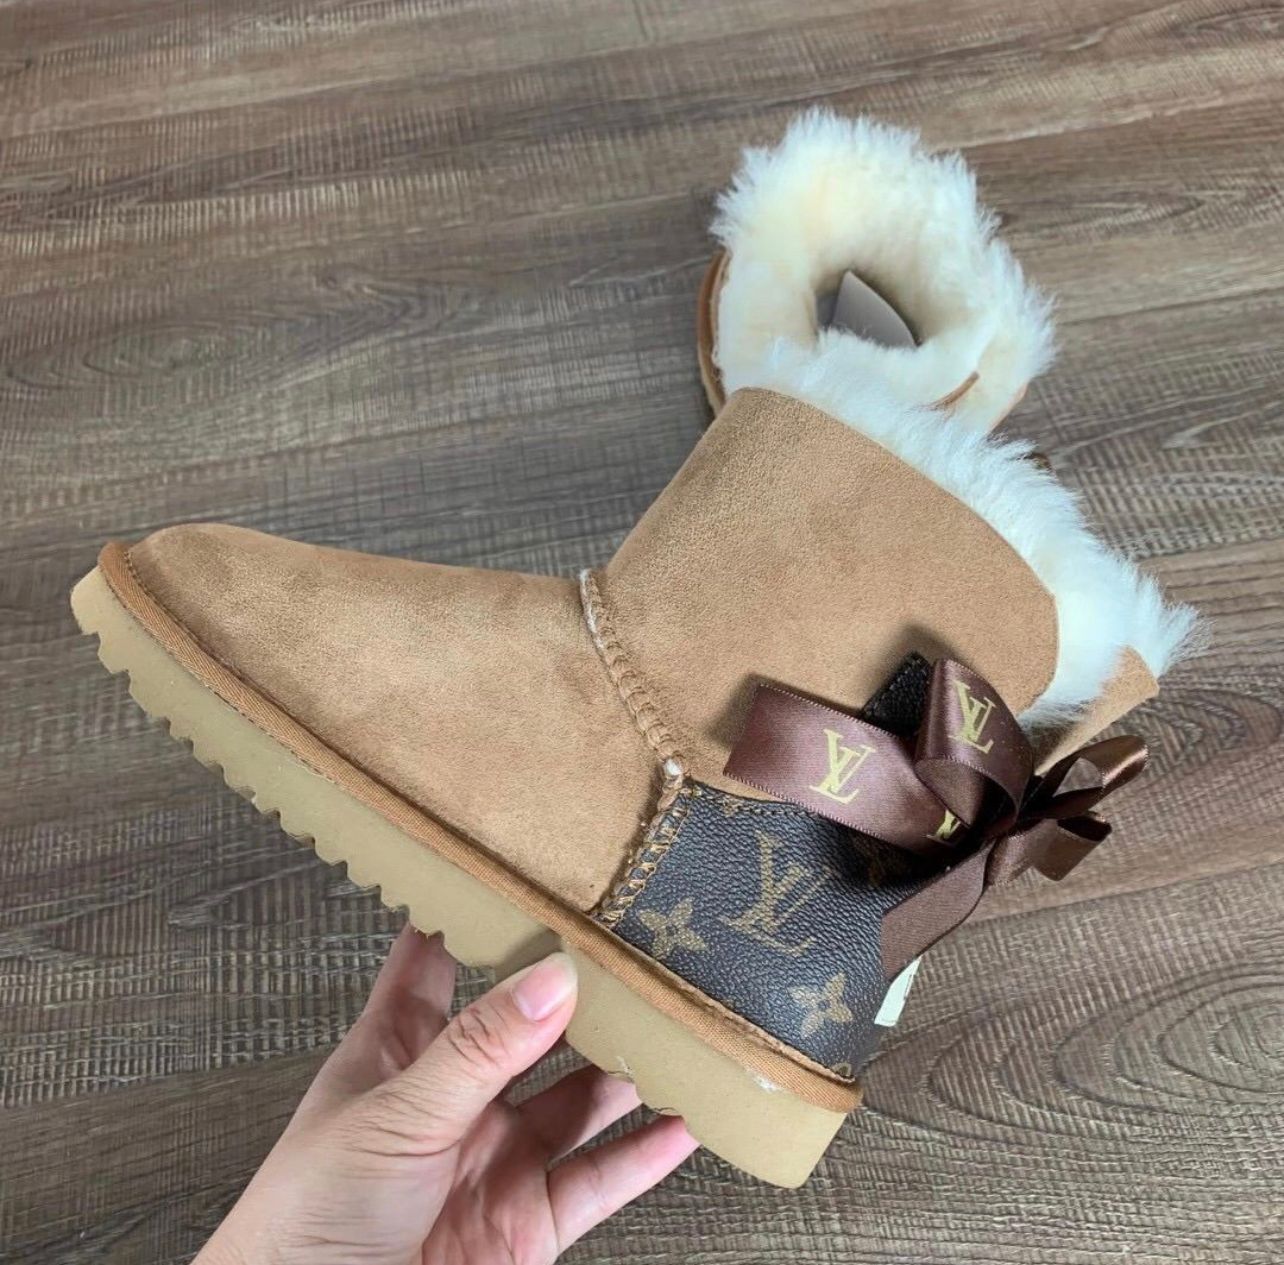 LV Ugg boots  Lv boots, Boots, Ugg boots